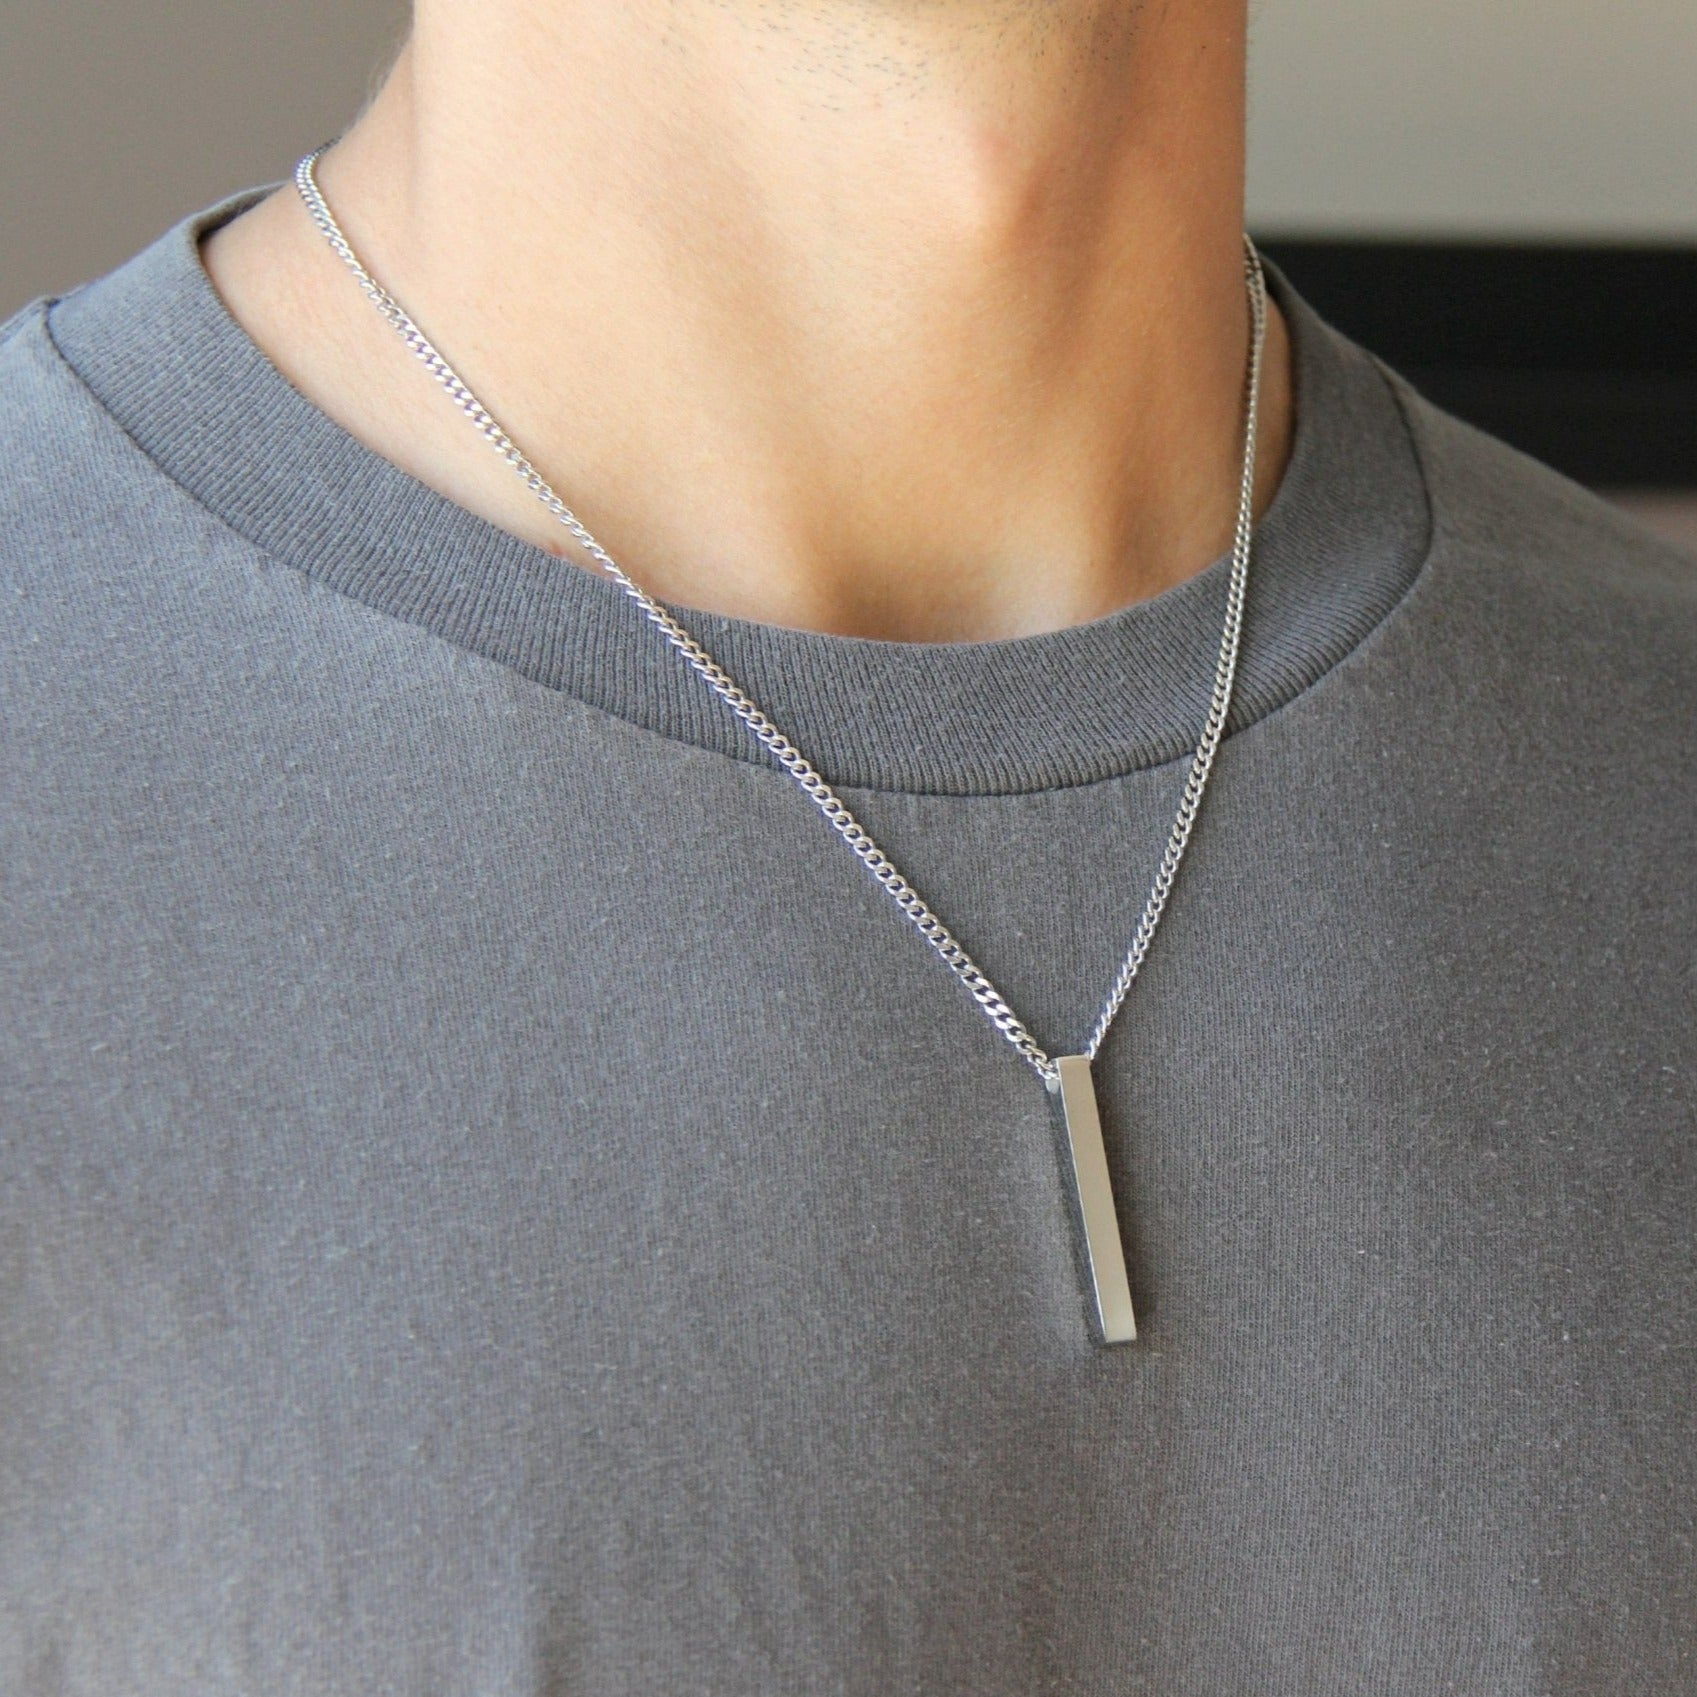 Buy Silver Mens Necklace, Silver Necklace for Men, Compass Pendant Necklace,  Mens Jewelry Onyx Necklace, Silver Chain Necklace, Initial Necklace Online  in India - Etsy